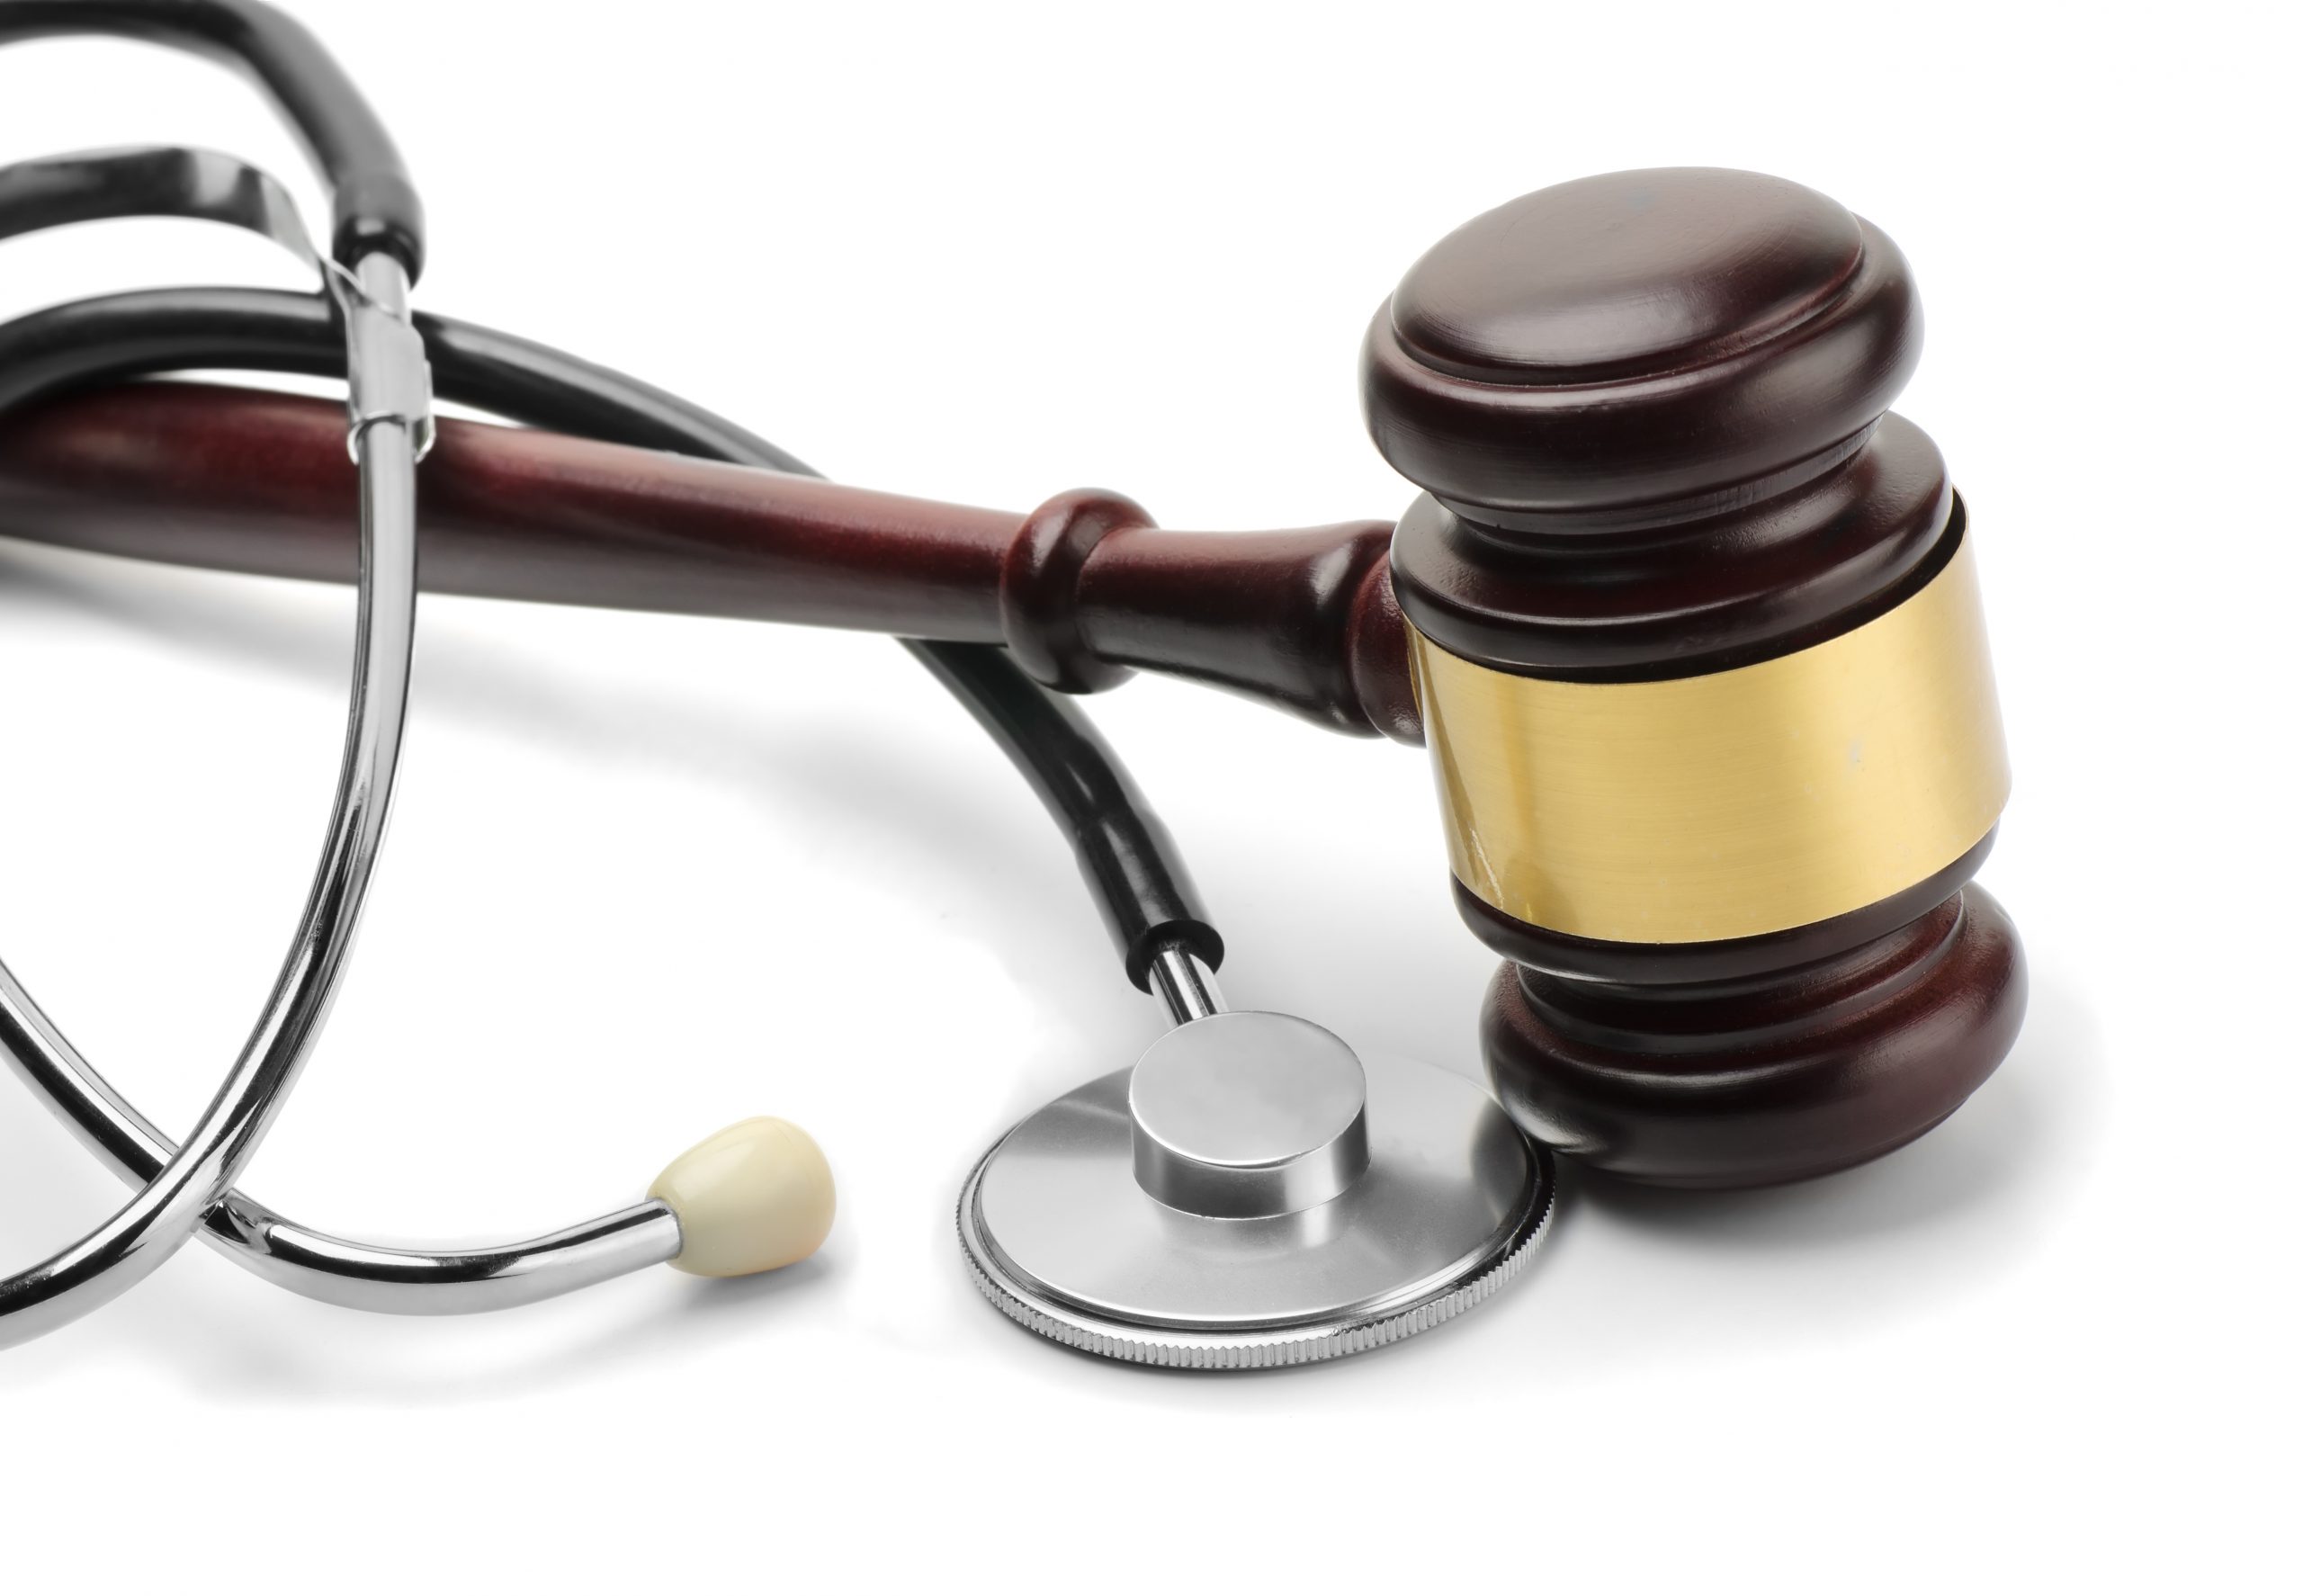 A GPs legal obligations and COVID-19